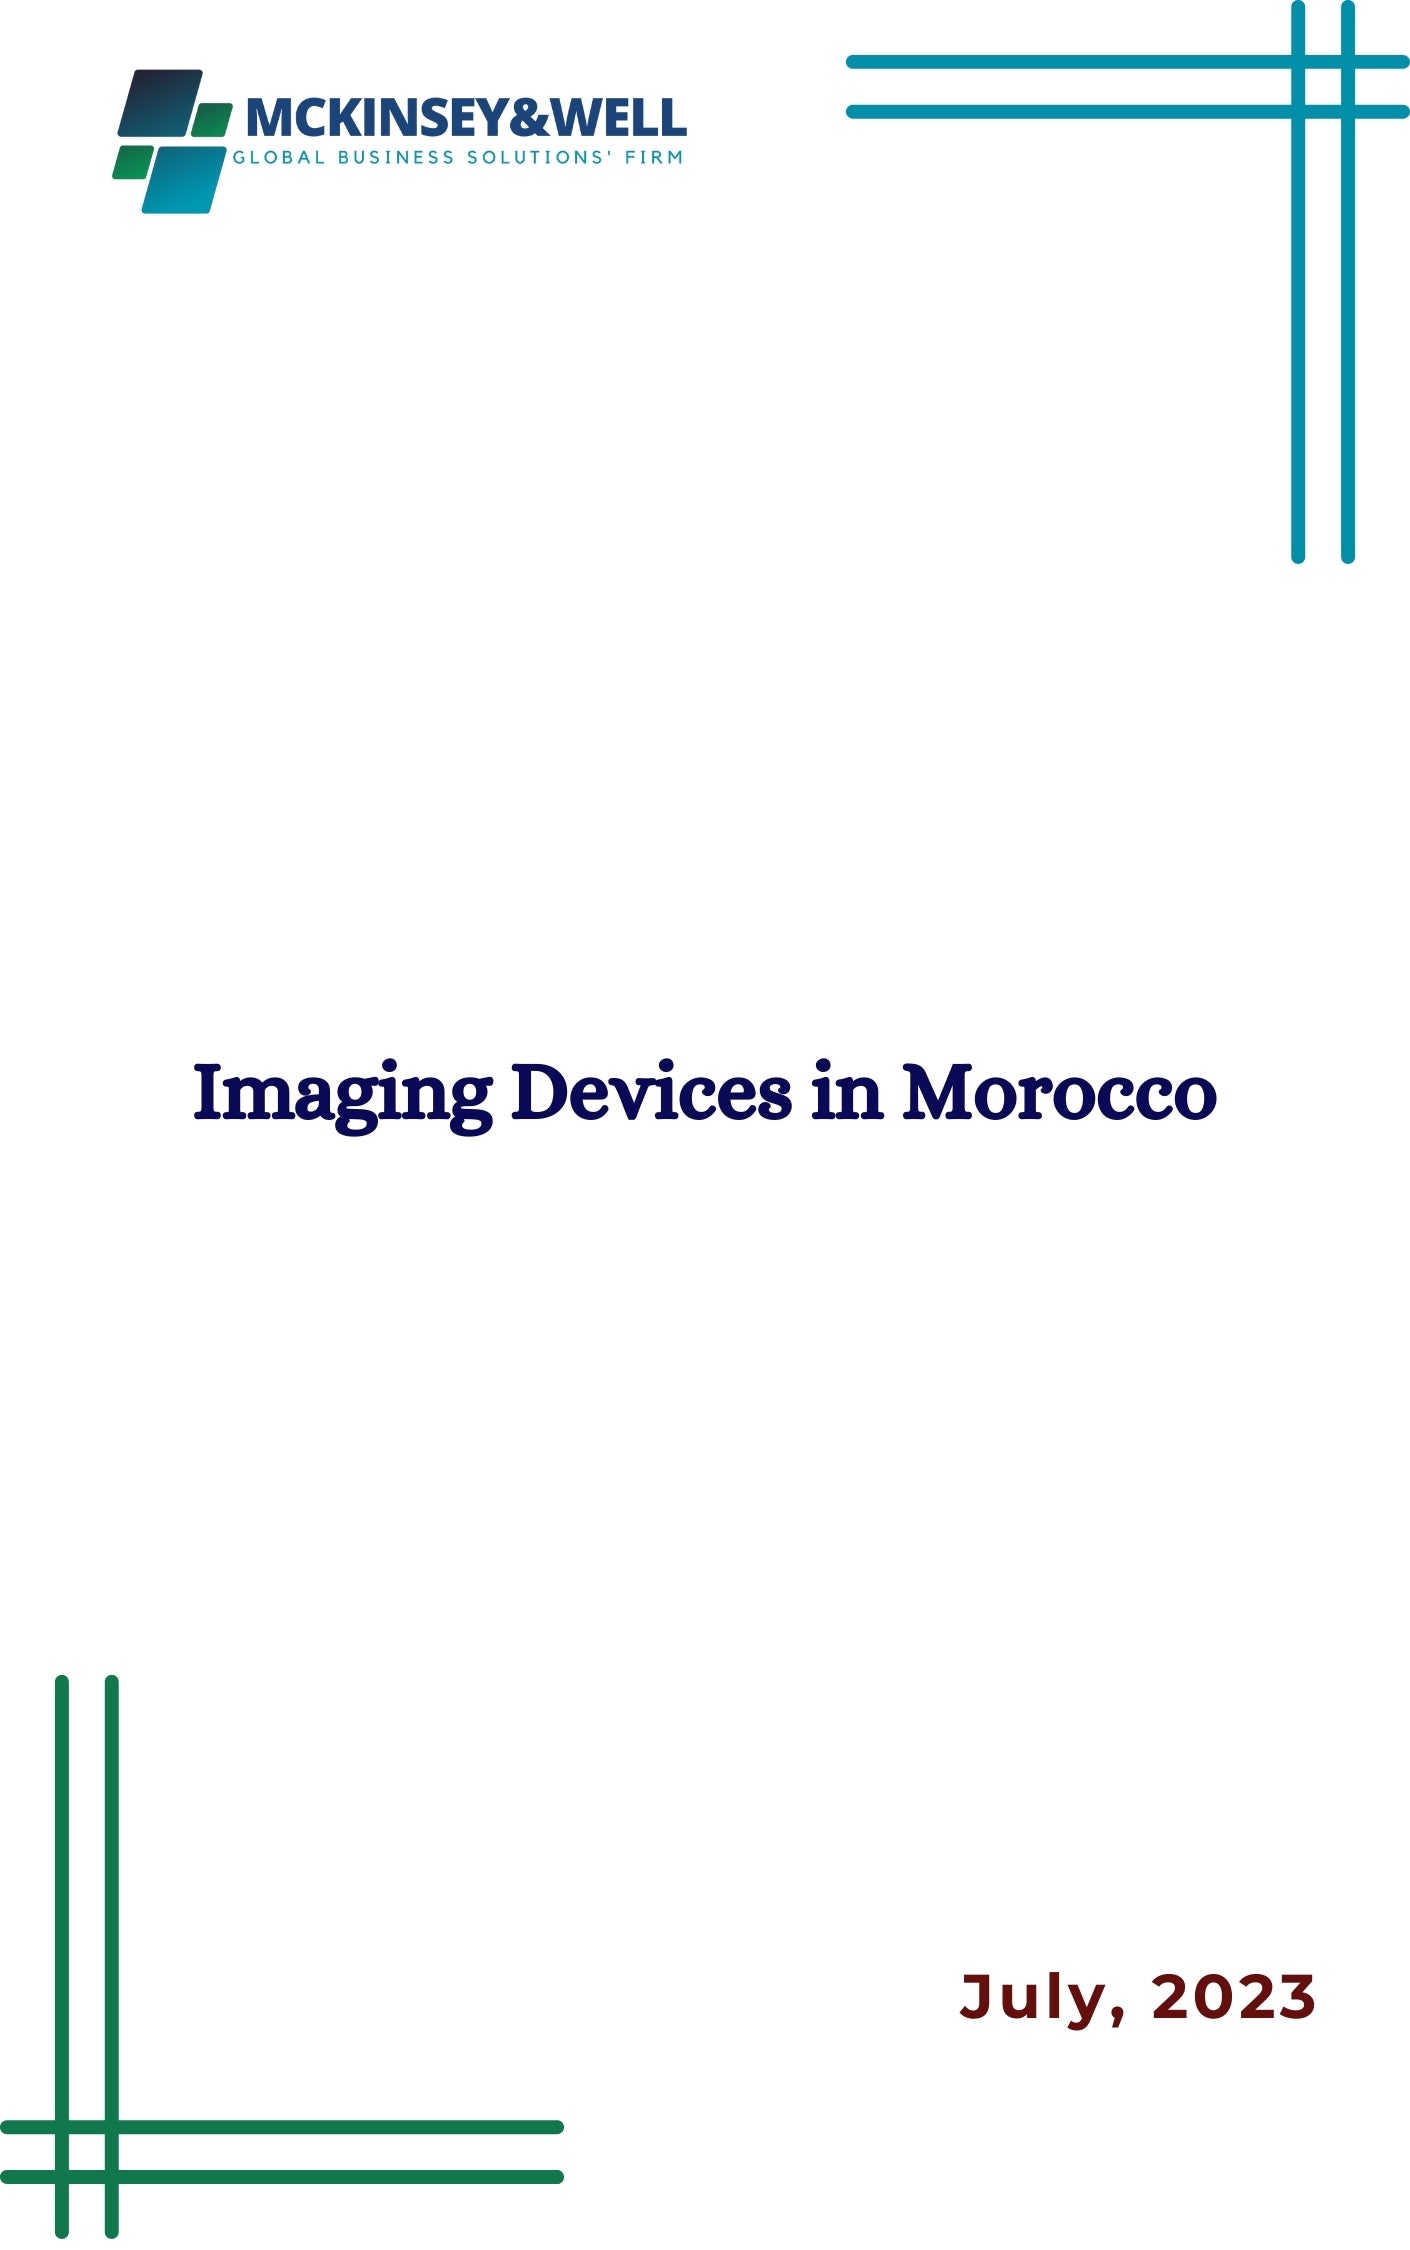 Imaging Devices in Morocco